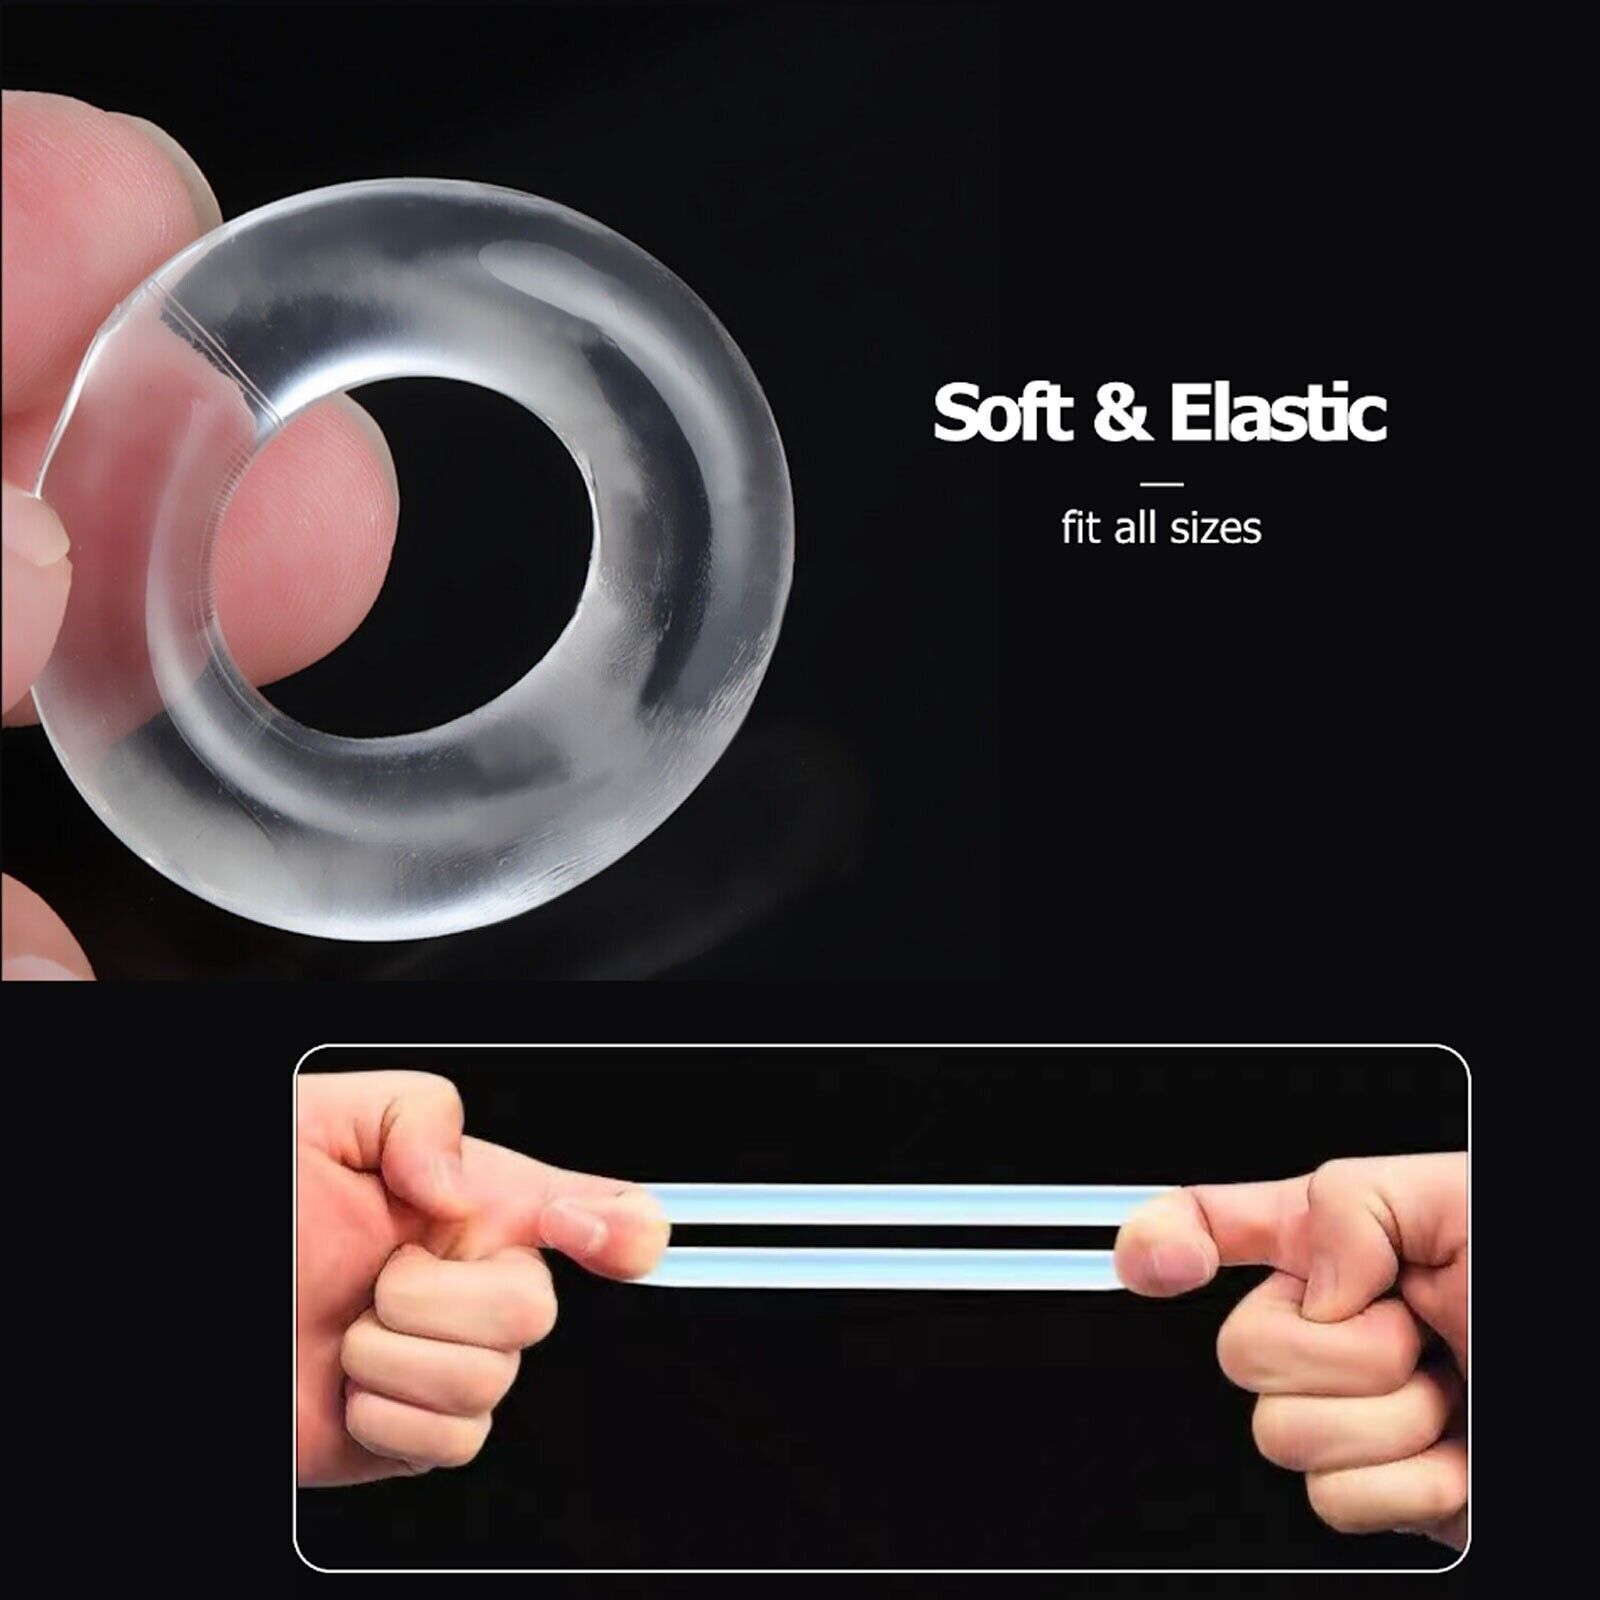 Silicone Penis Ring Sex Toys for Men, Super Stretchy Support Rings for Male  Pleasure, Blue,1 Pcs 